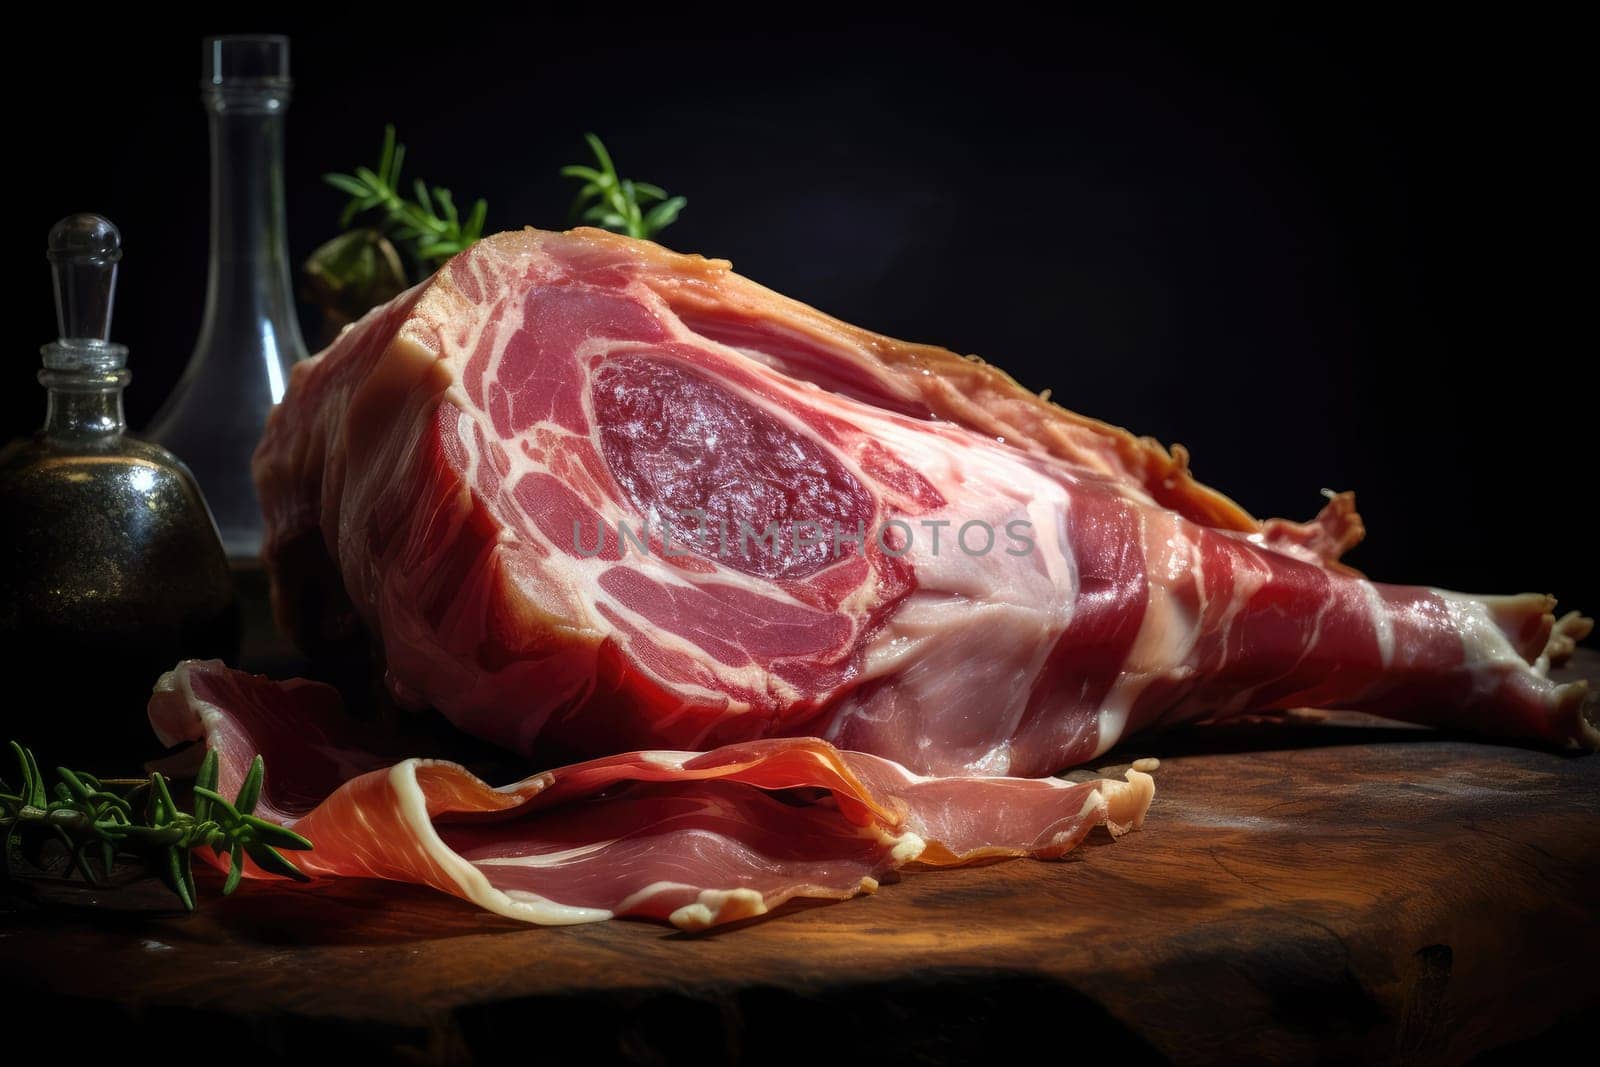 Thin slices of meat jamon, composition with herbs, razmorin, and glass bottles with sauce on a wooden cutting board on a black background by ketlit